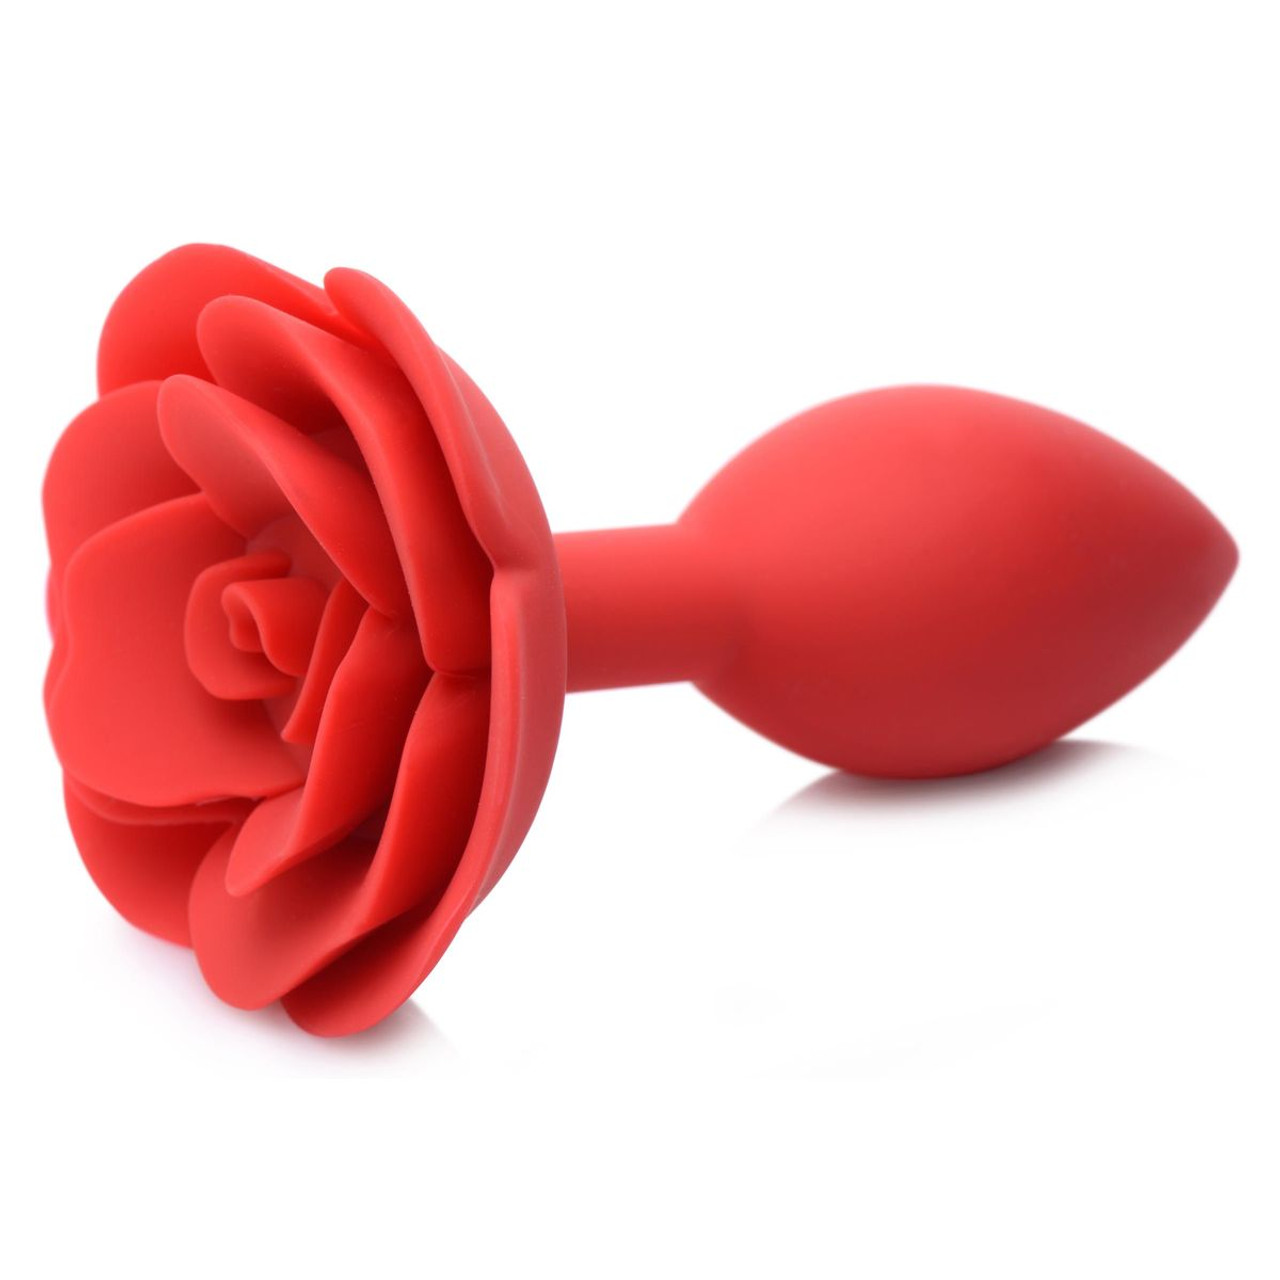 Master Series Booty Bloom Silicone Rose Anal Plug product image